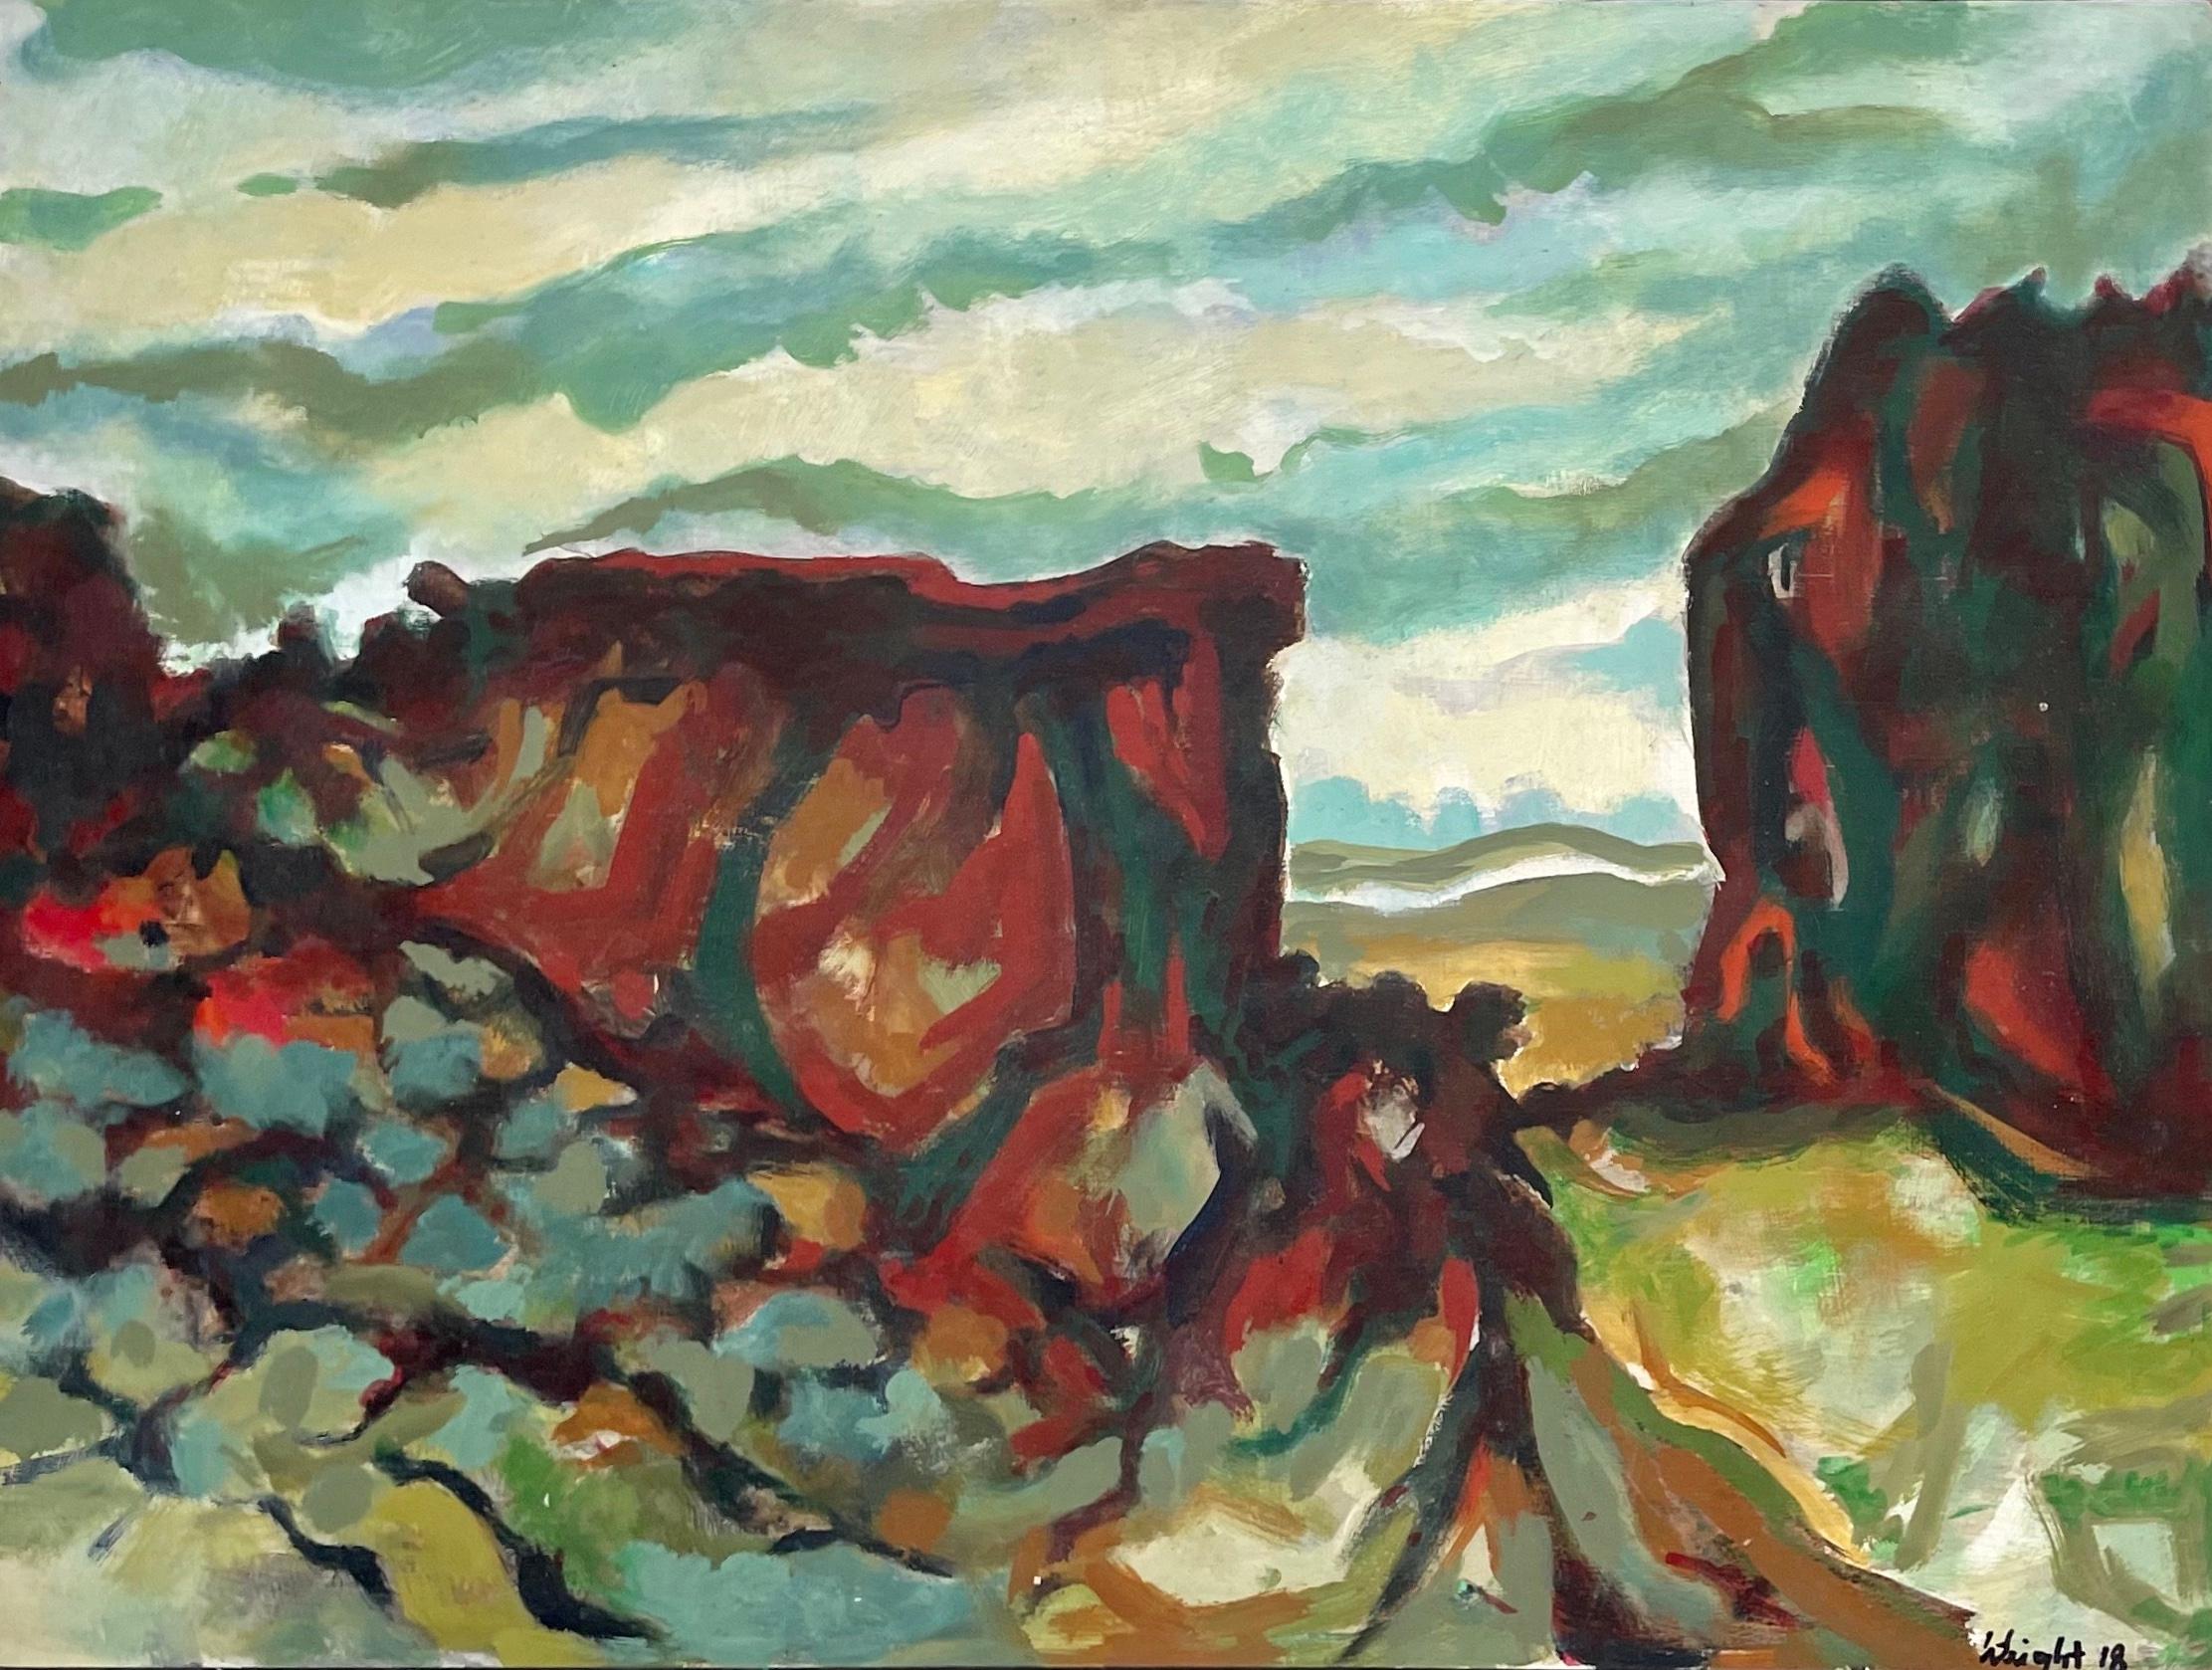 Michael Wright Landscape Painting - Diablo Canyon VIII, abstract landscape painting